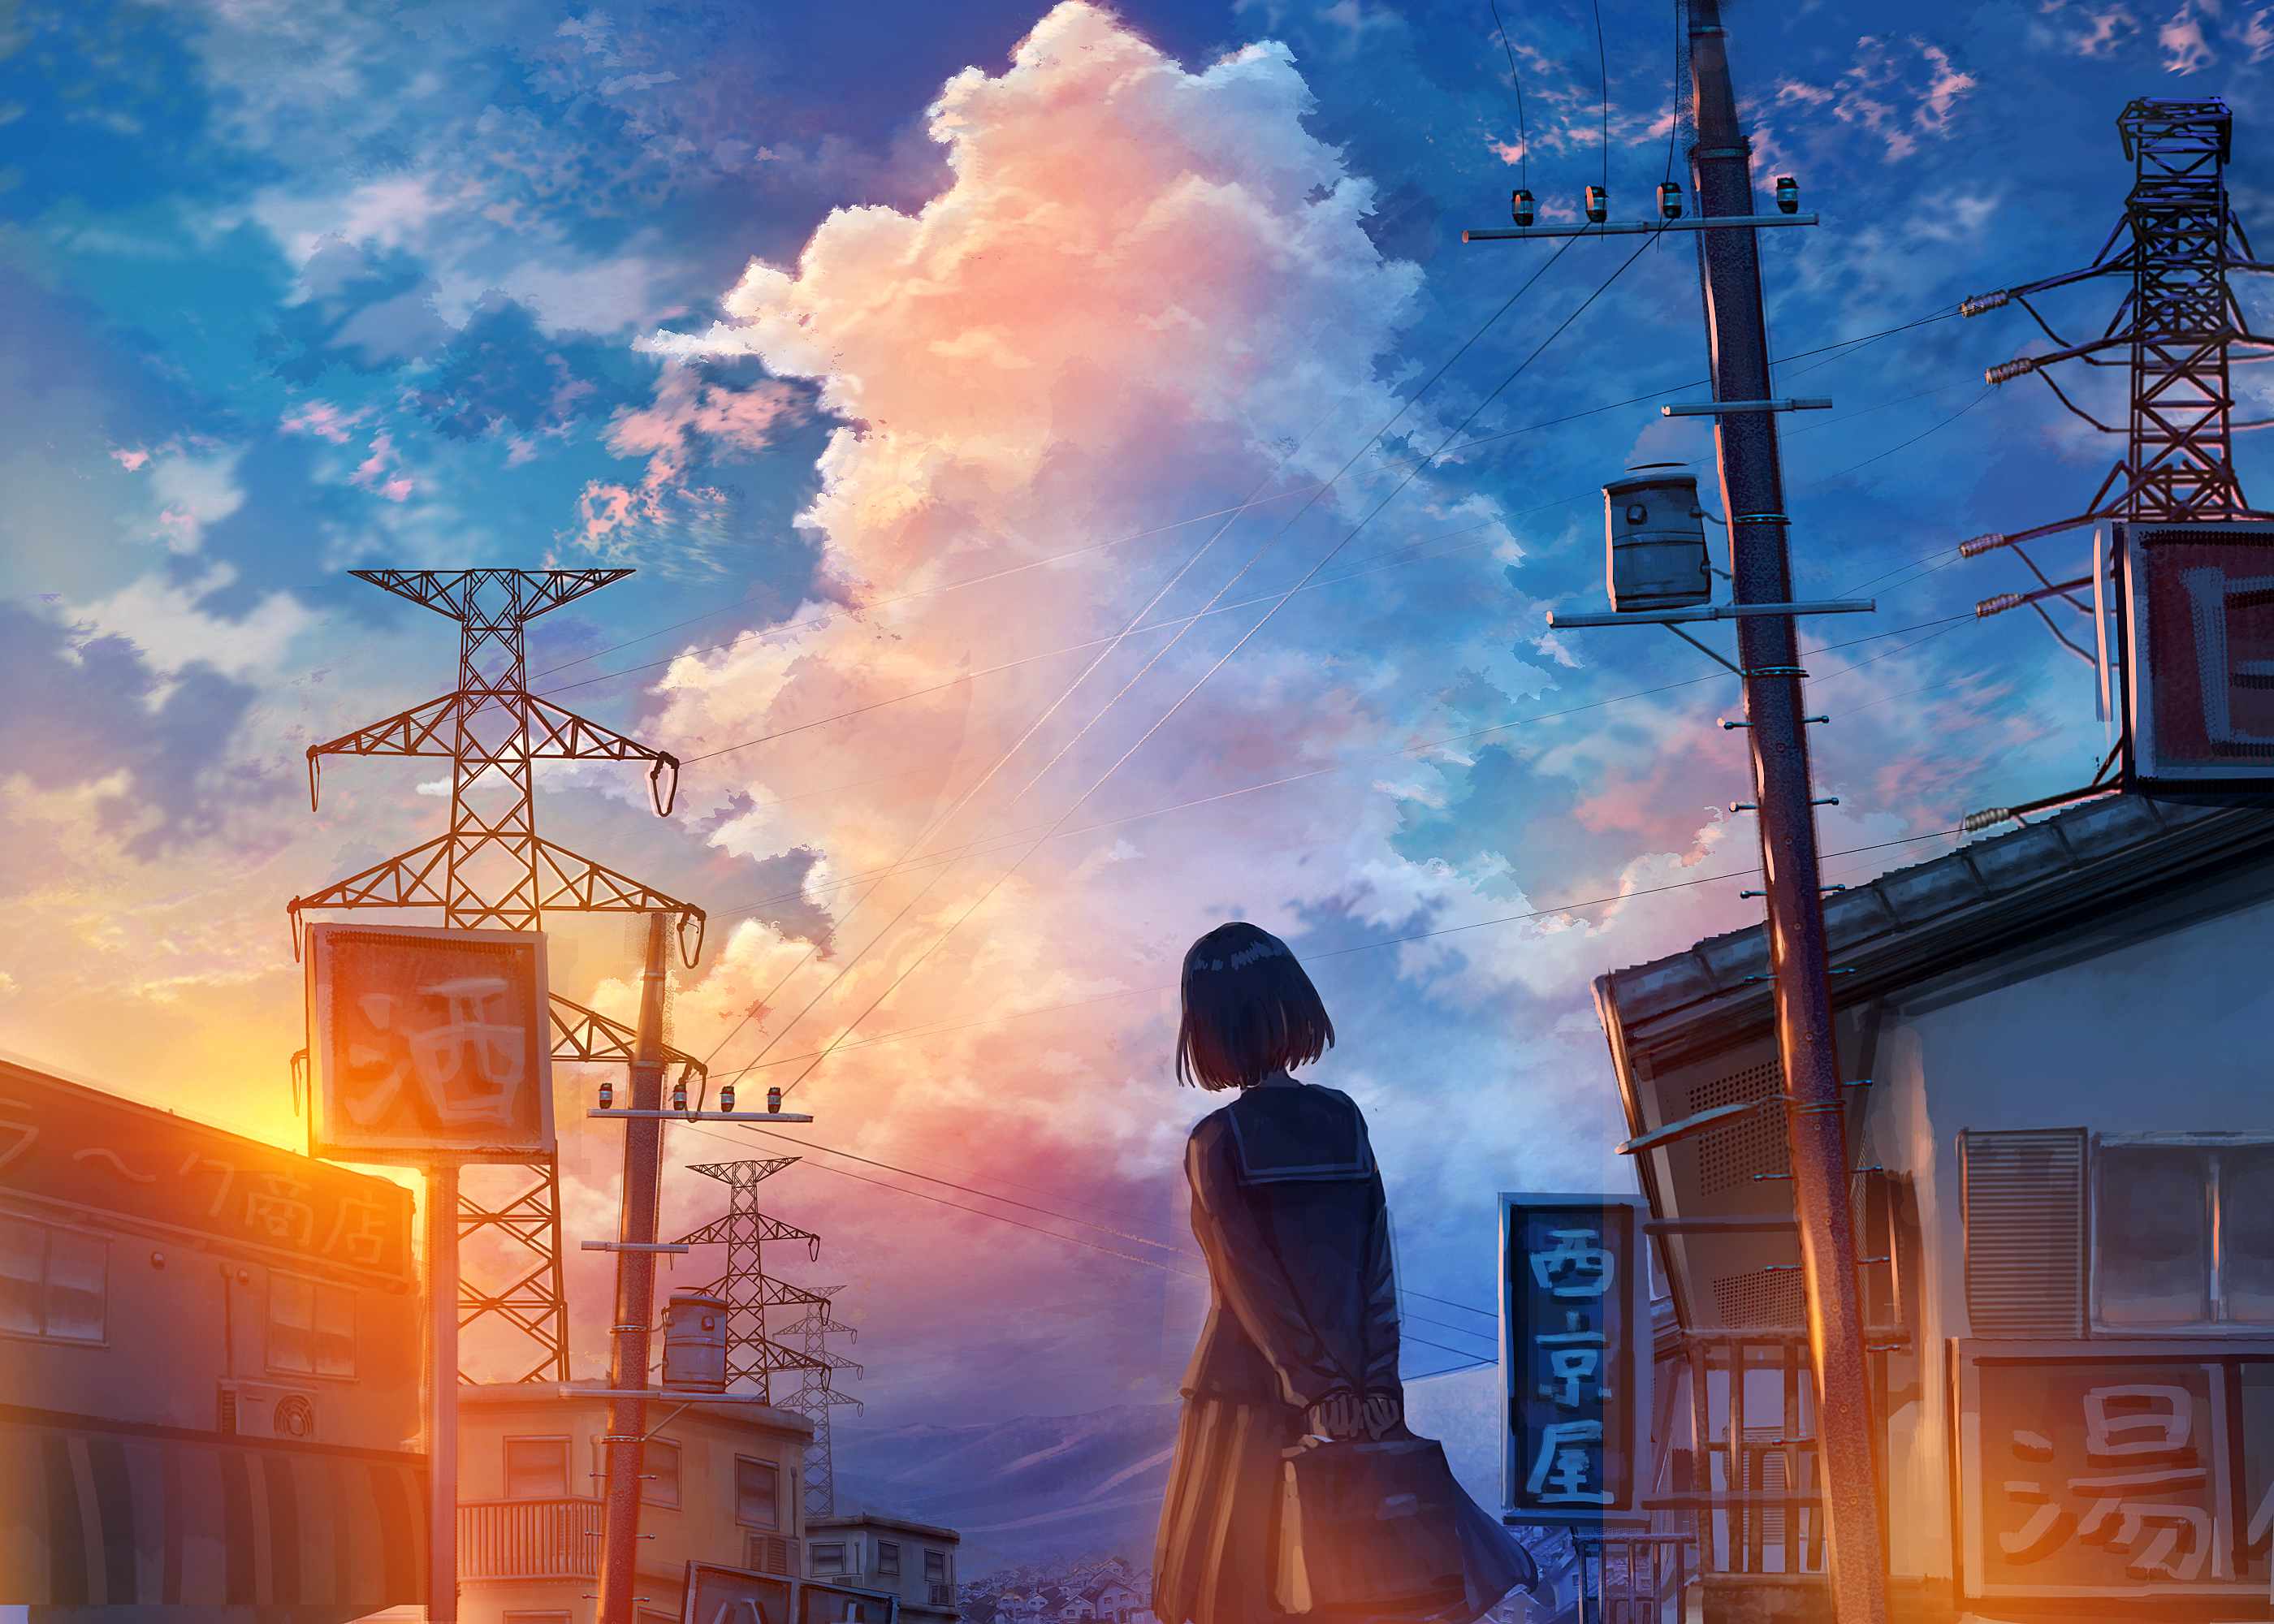 Sunset Clouds Anime Anime Girls Moescape Powerlines 2800x2000